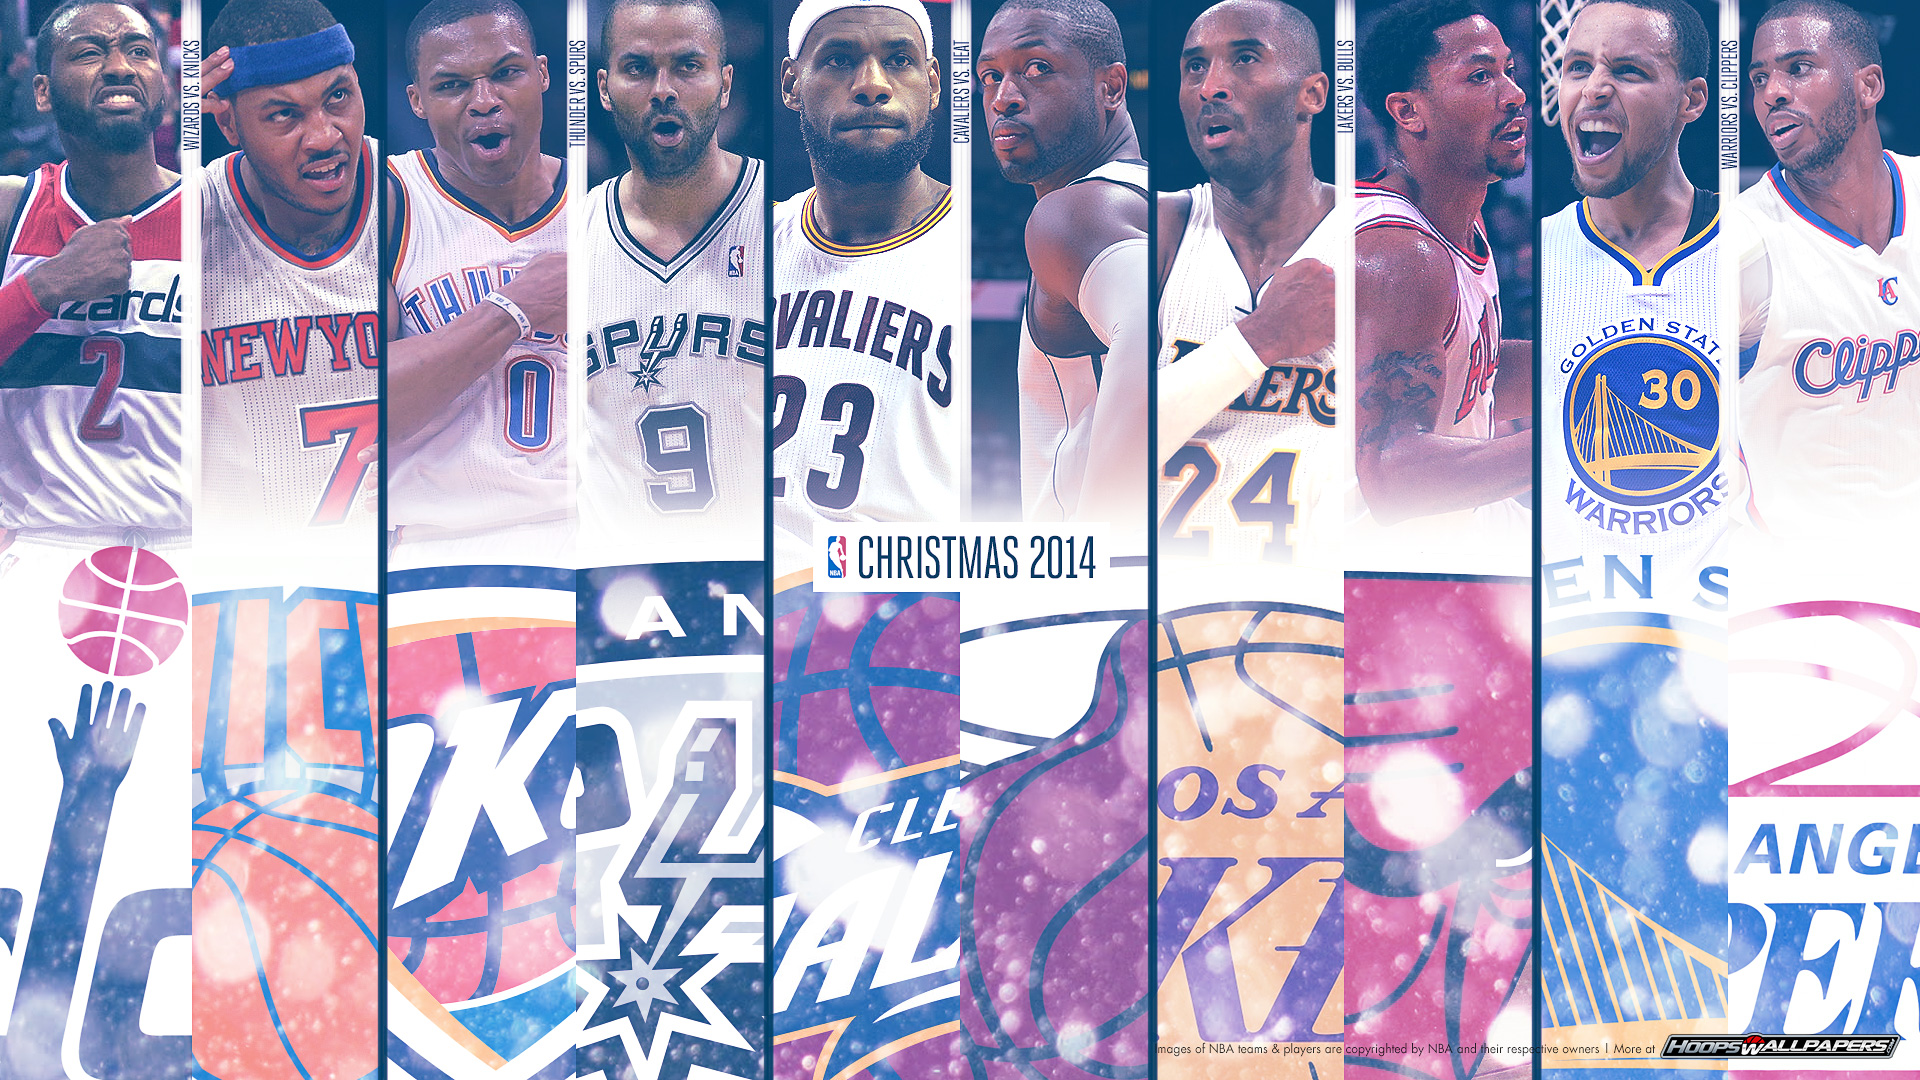  NBA wallpaper Click on the image for the full HD resolution wallpaper